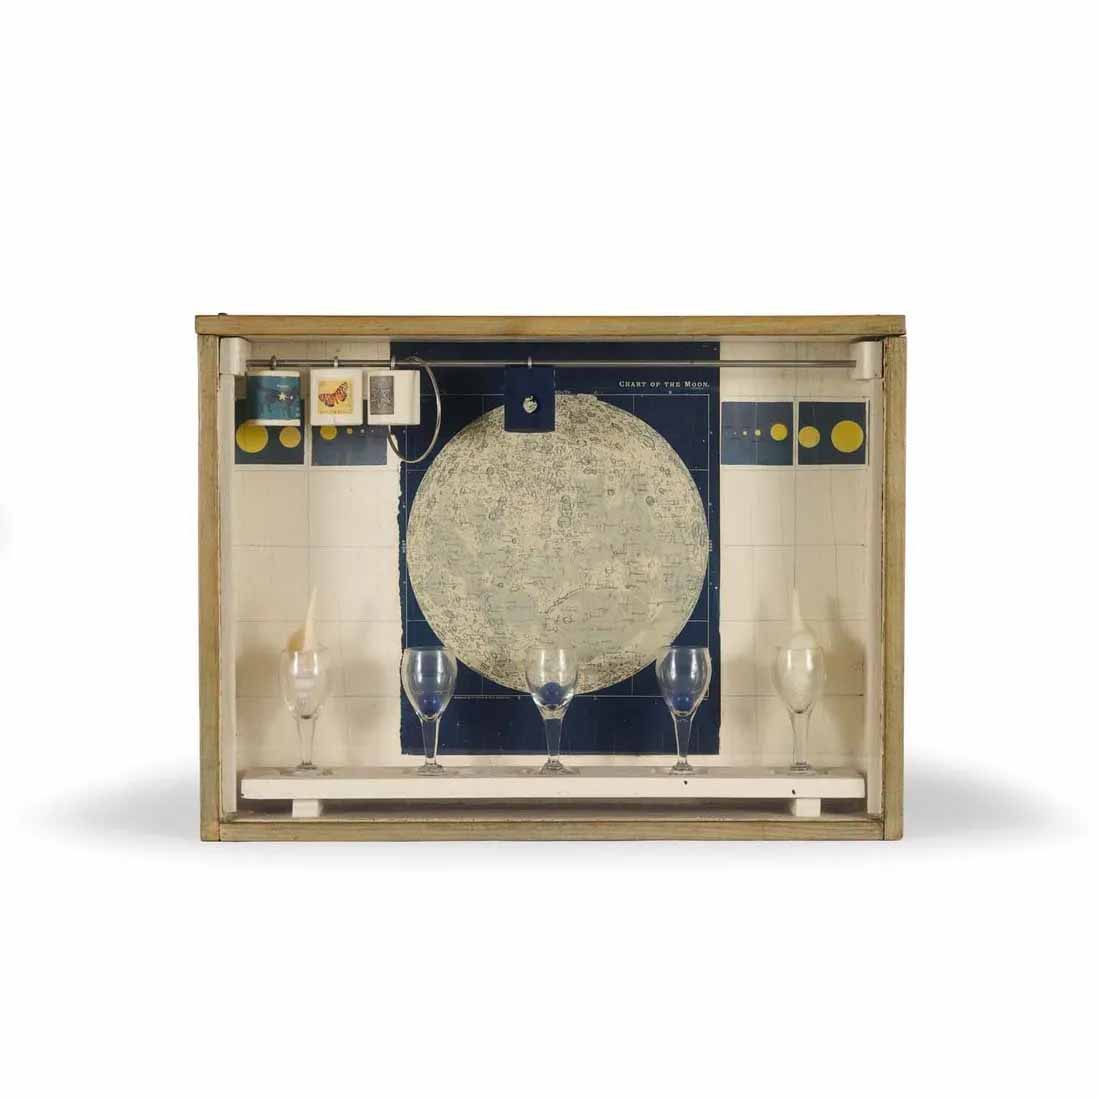 Joseph Cornell’s circa-1950 &#8216;Lunar Set&#8217; from the Genevieve and Jean Paul Kahn collection comes to Piasa June 5